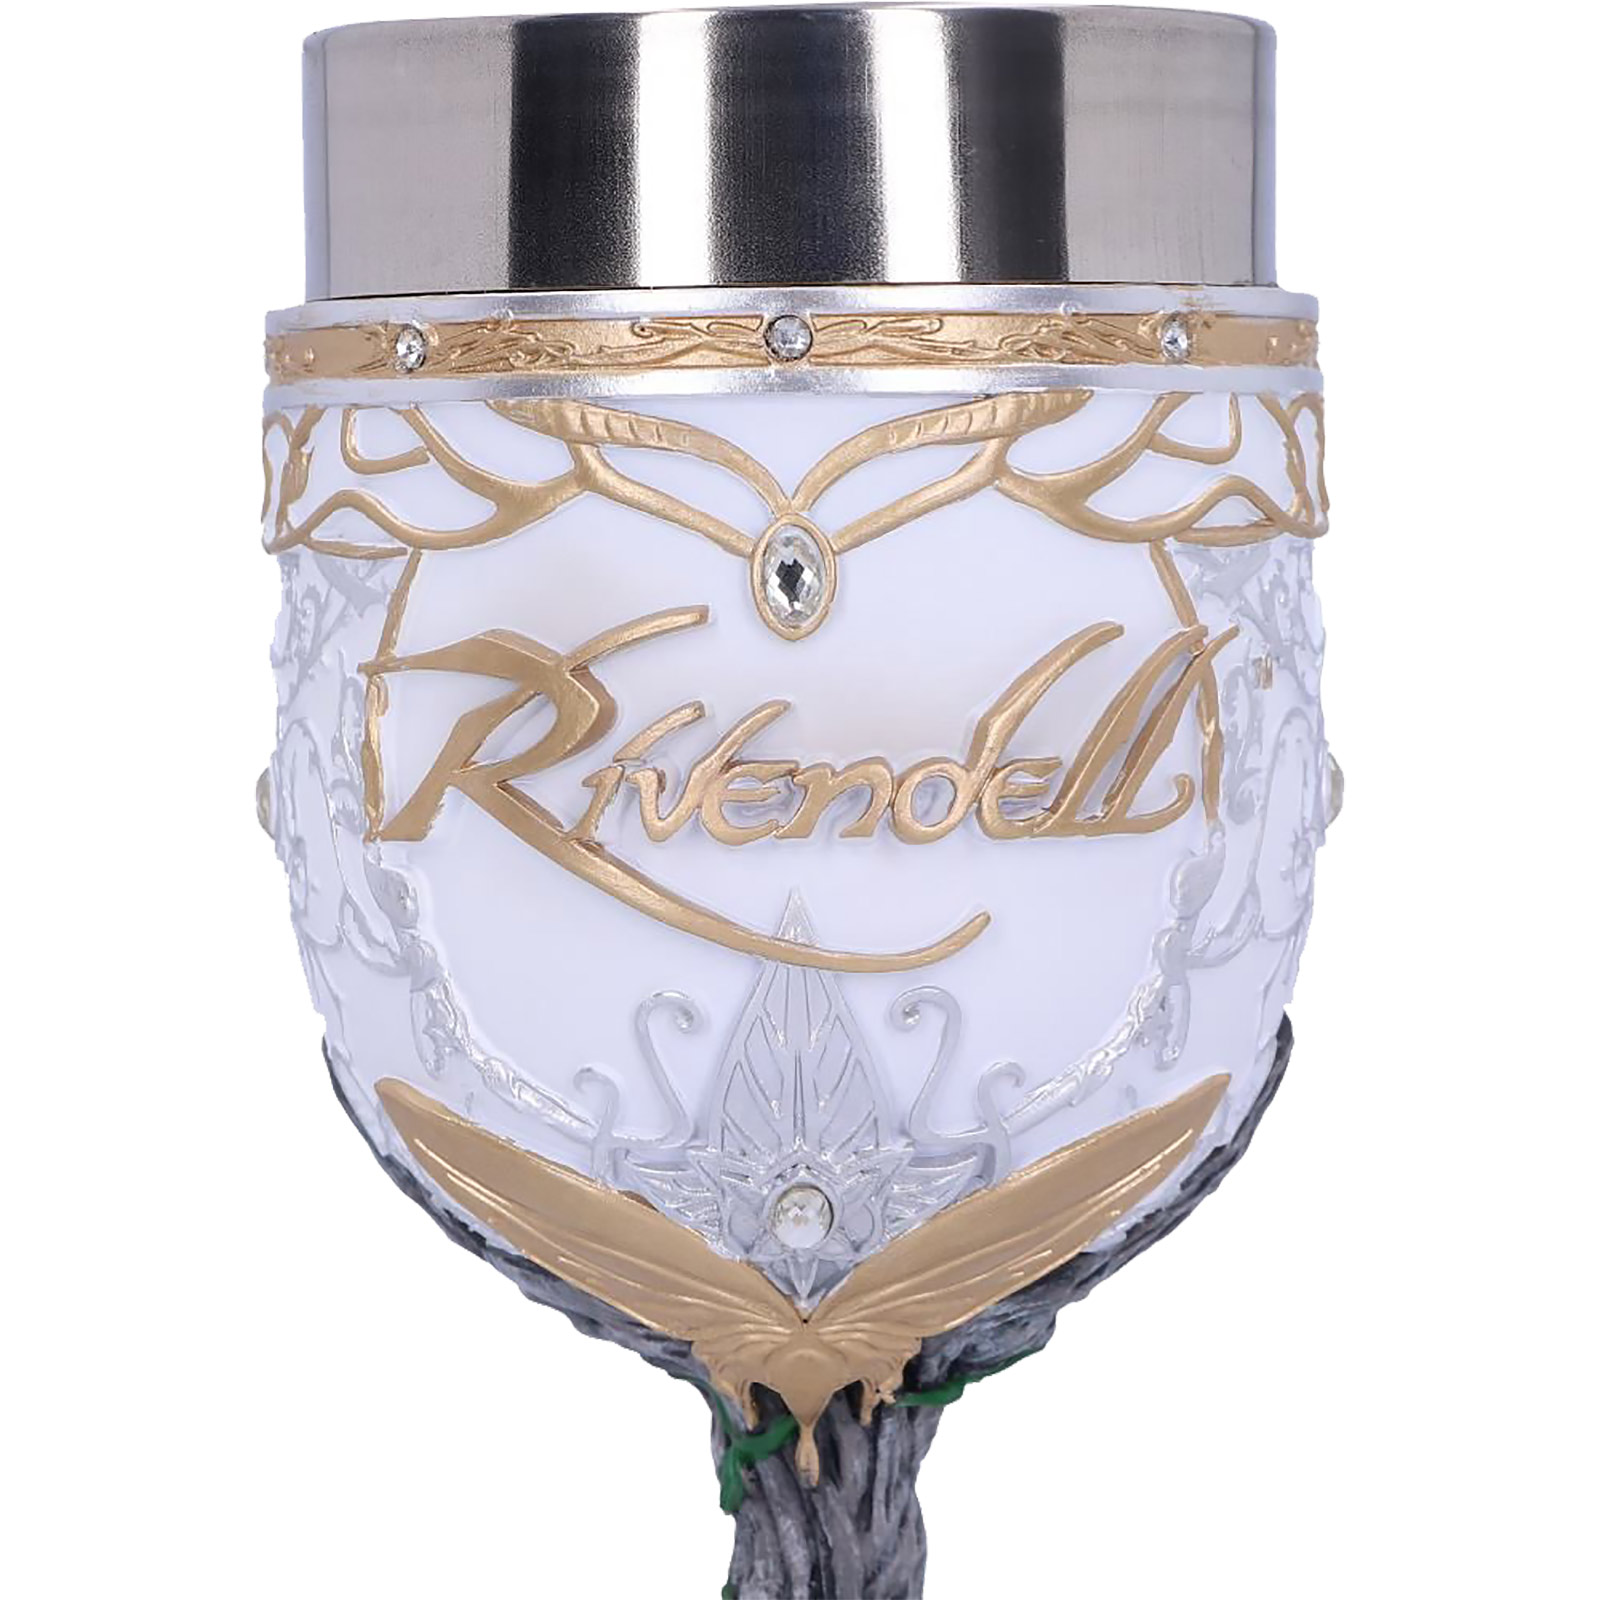 Lord of the Rings - Rivendell Goblet Deluxe